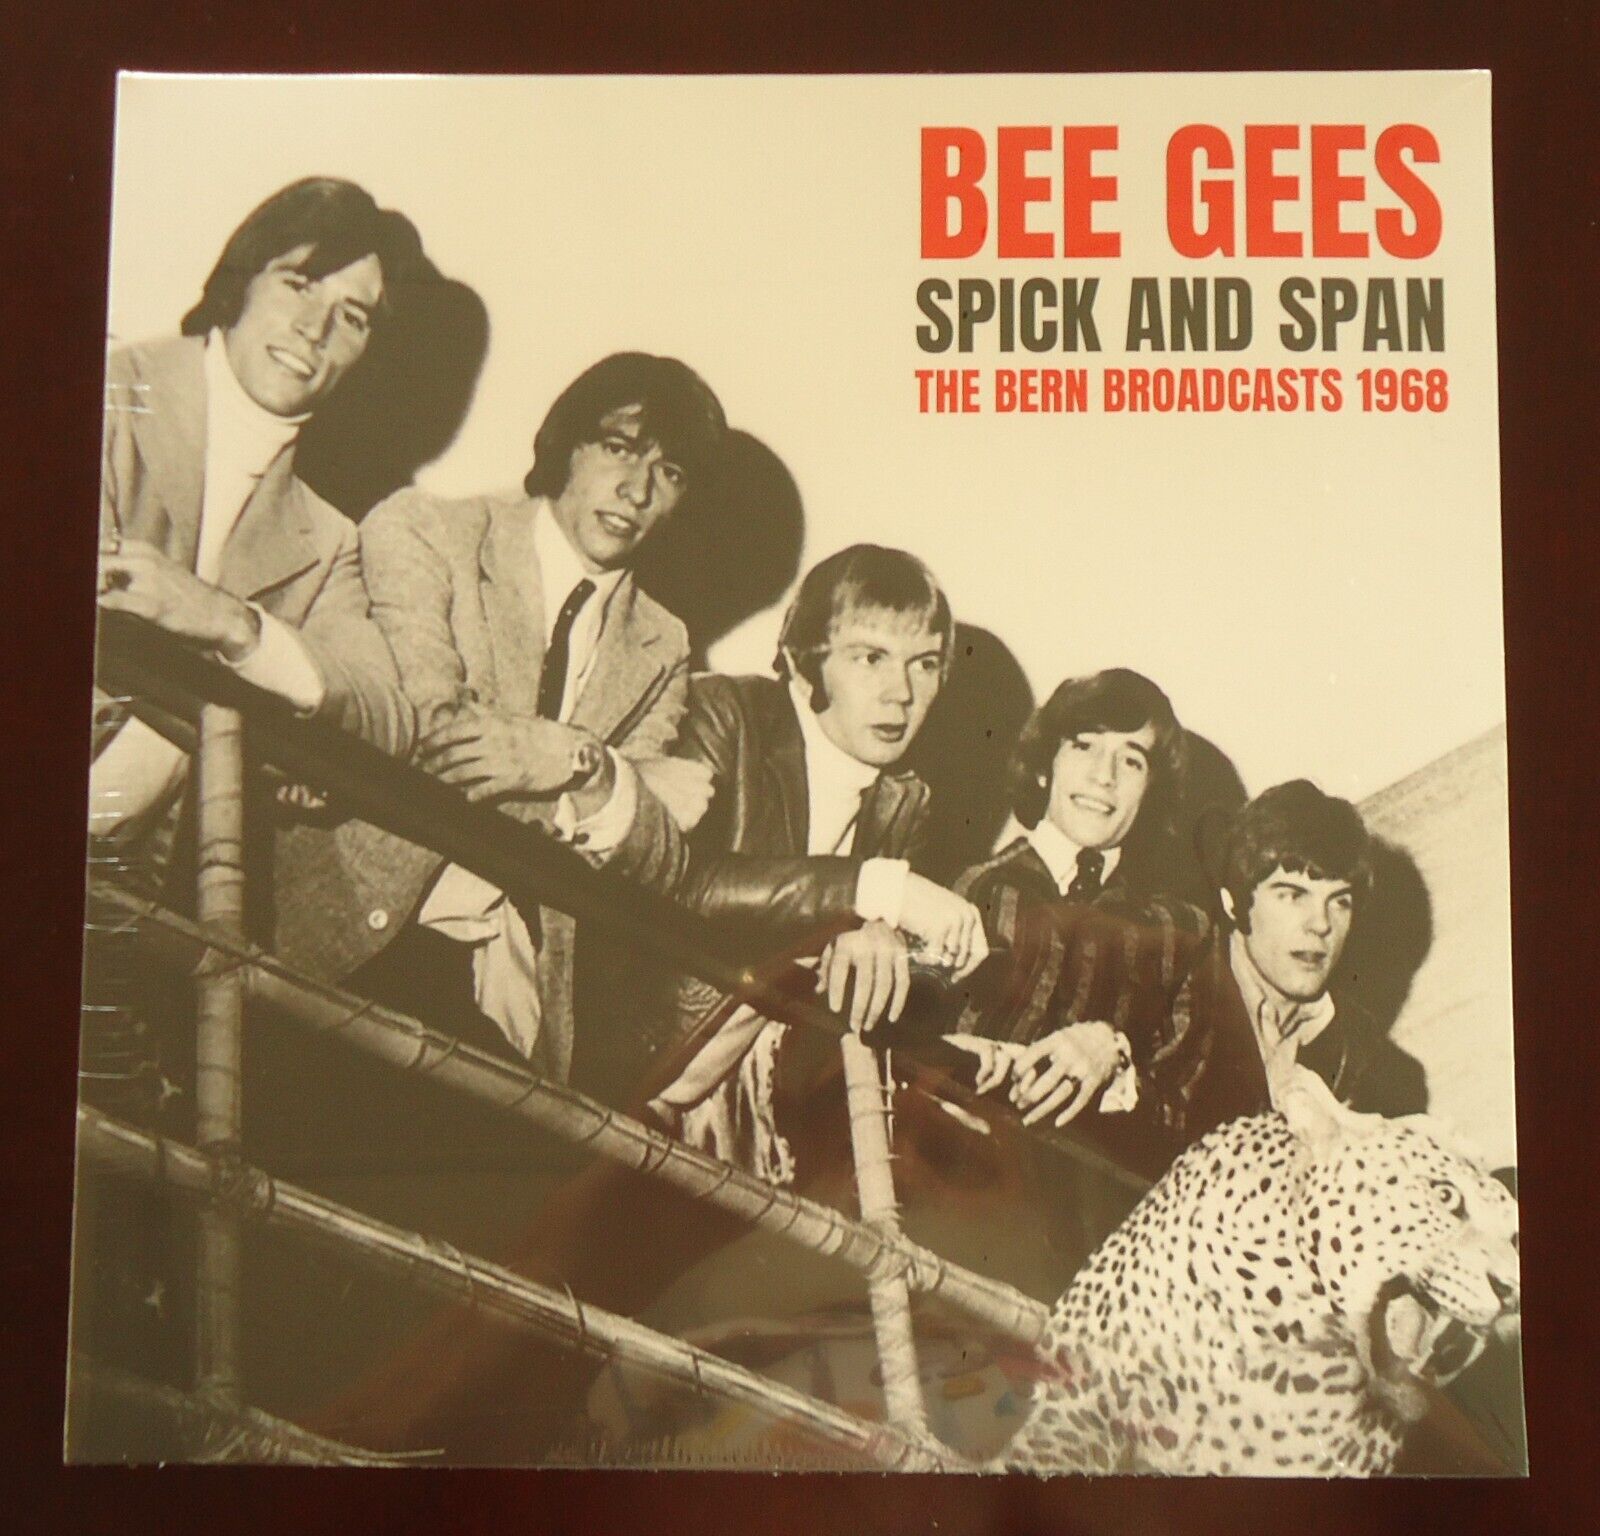 The Bee Gees Spick and Span The Bern Broadcasts 1968 LP (2018) NEW